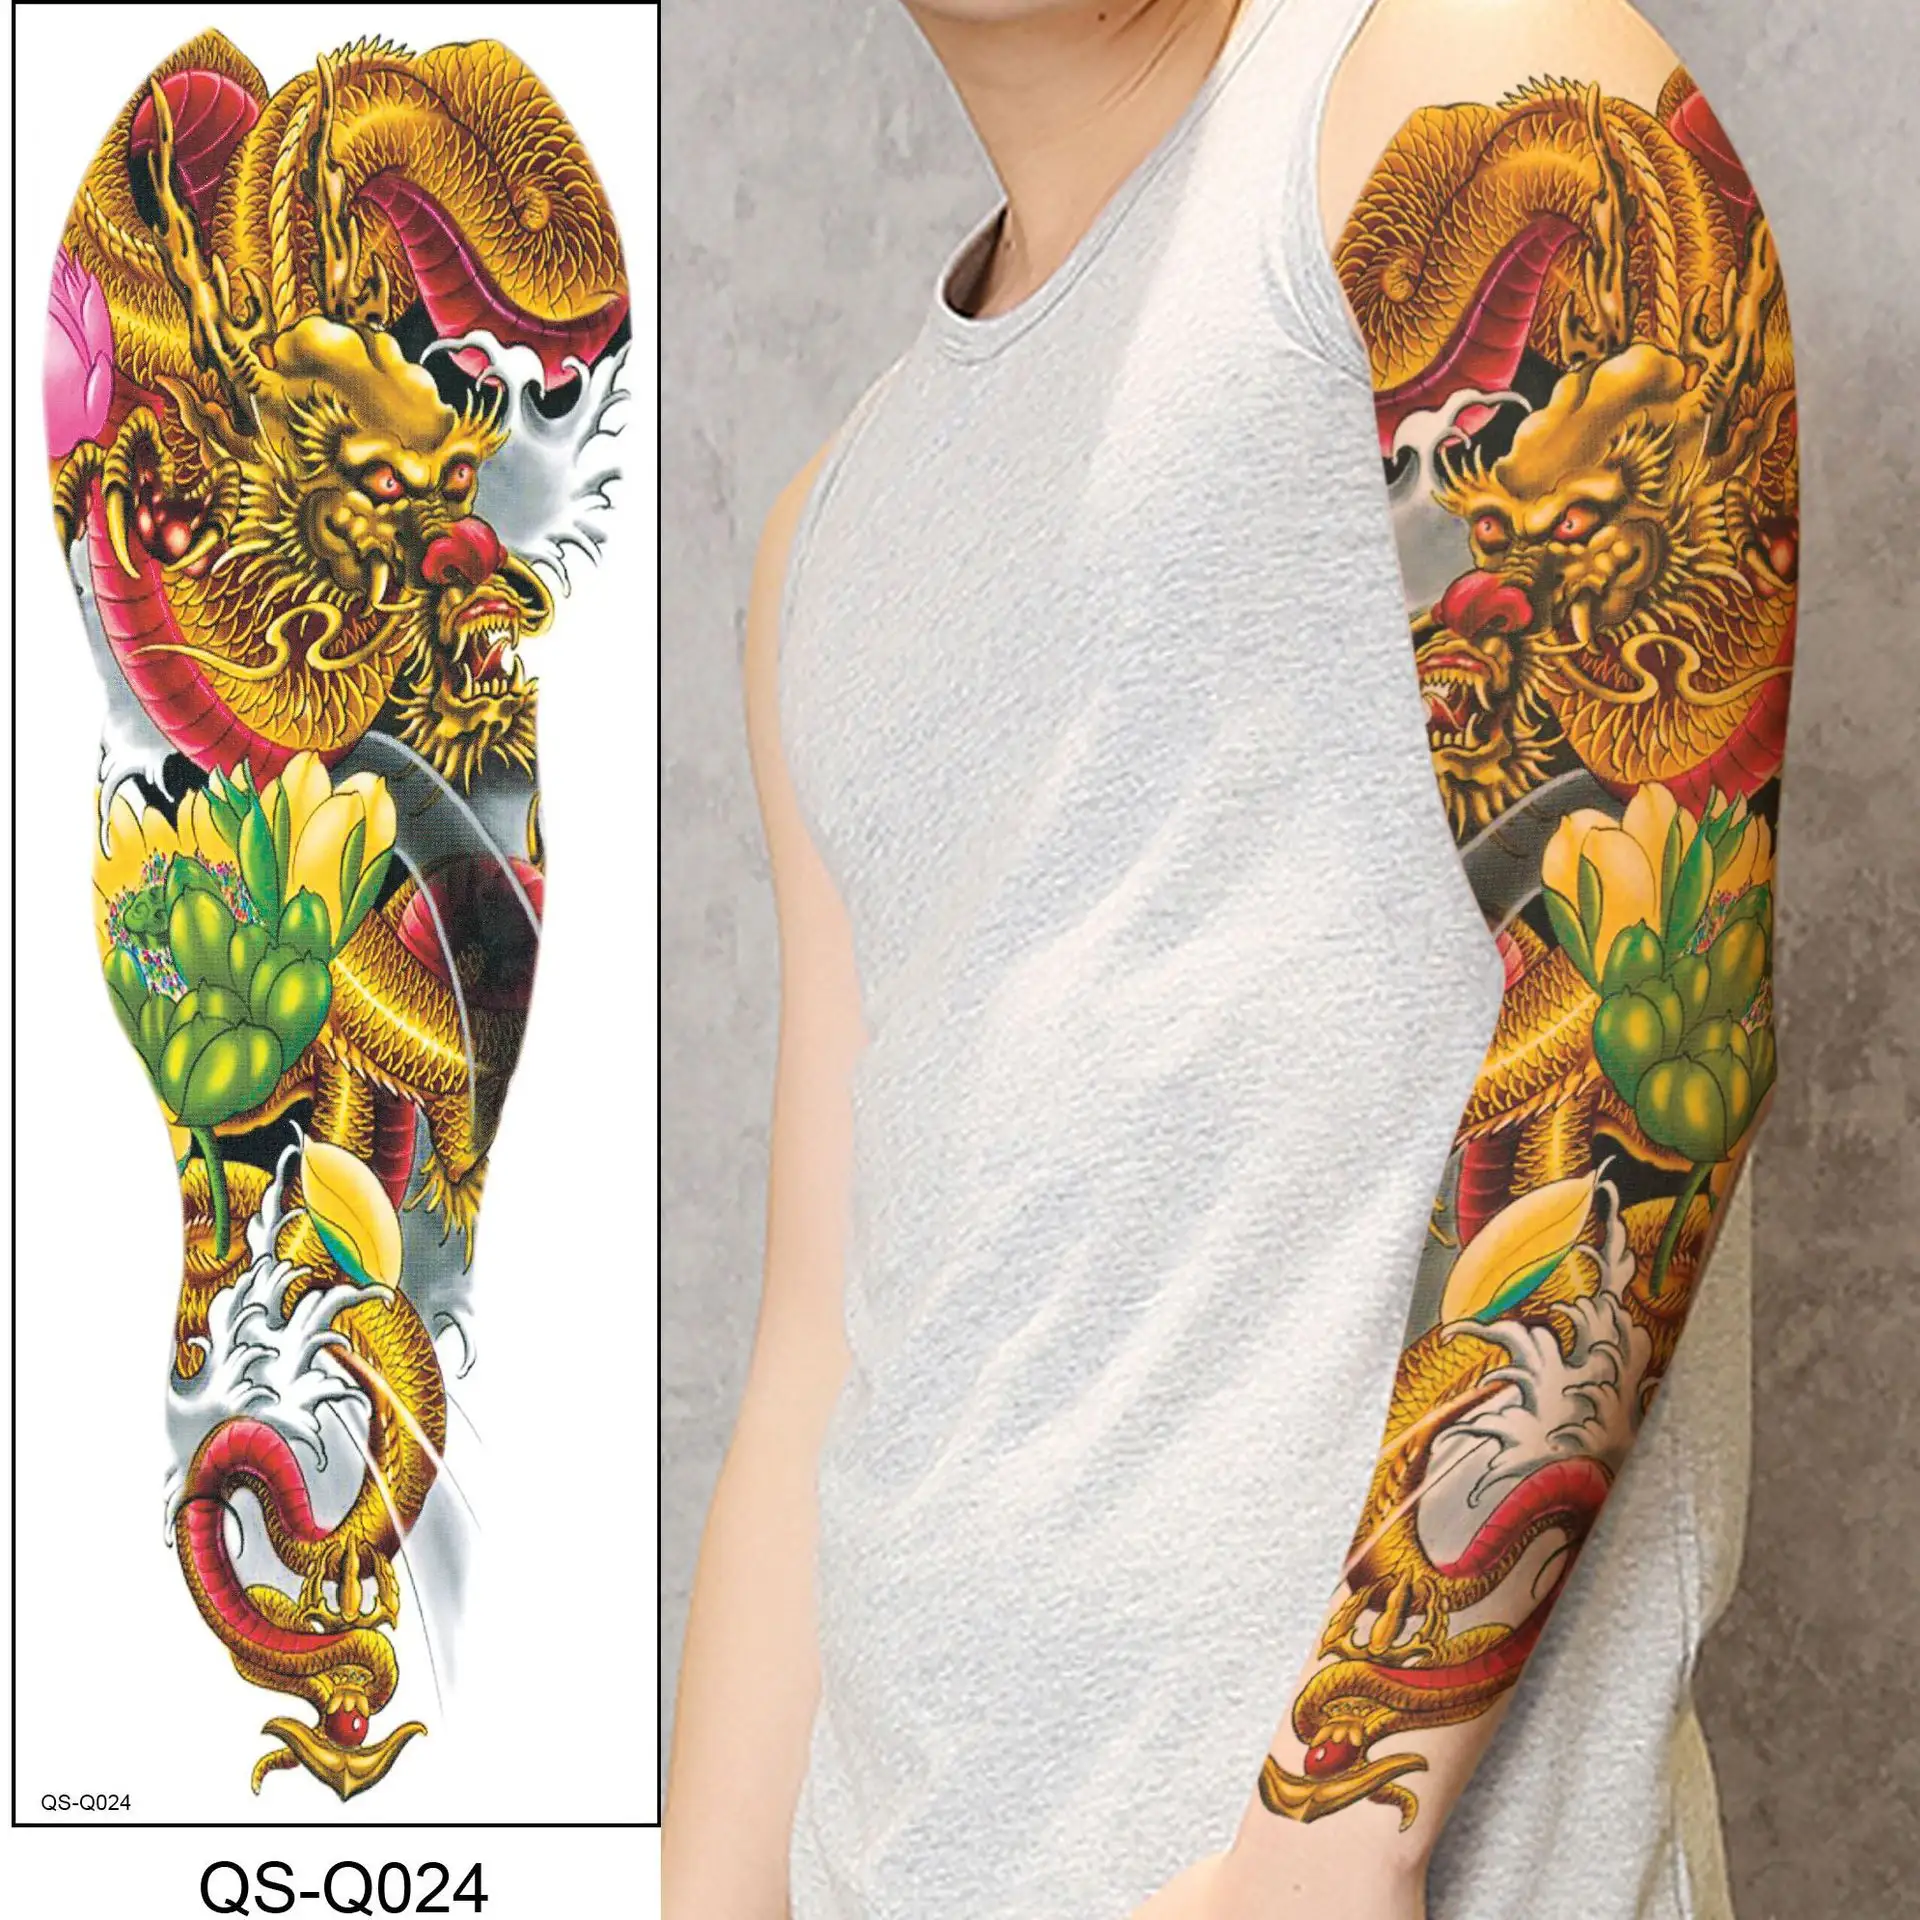 RTS Chinese Dragon Tattoo Water Transfer Waterproof Temporary Body Art Sticker for Woman Man Colorful Sleeve Arms Makeup Tattoo